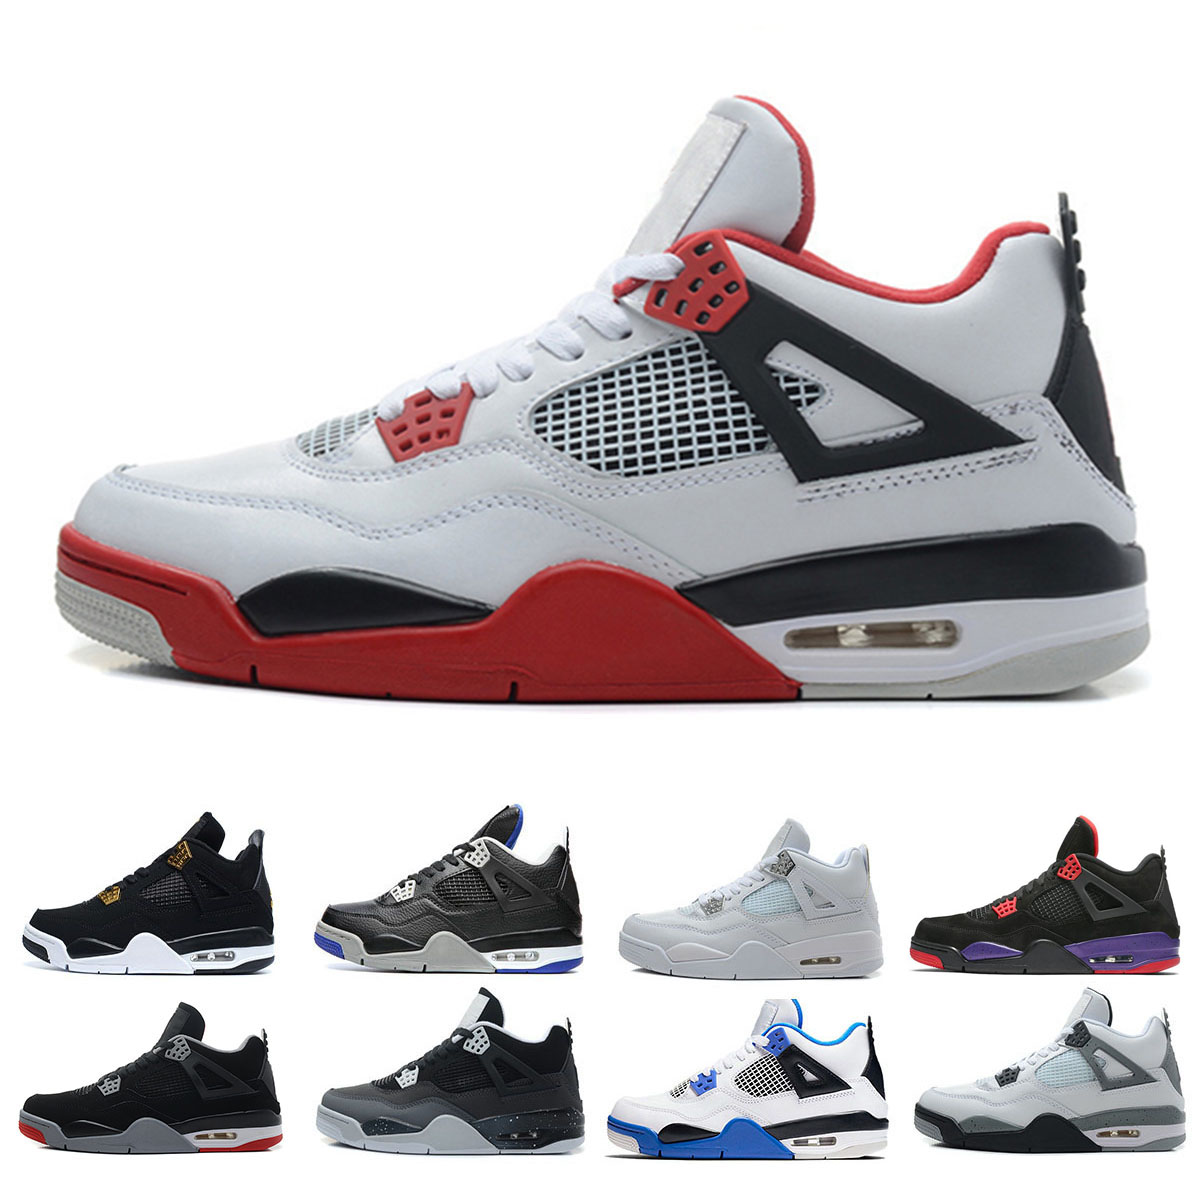 

Cheap 4 4s Basketball Shoes men Pure Money White Cement Black cat Bred Royalty Raptors Fire Red mens trainers Sports Sneakers size 8-13